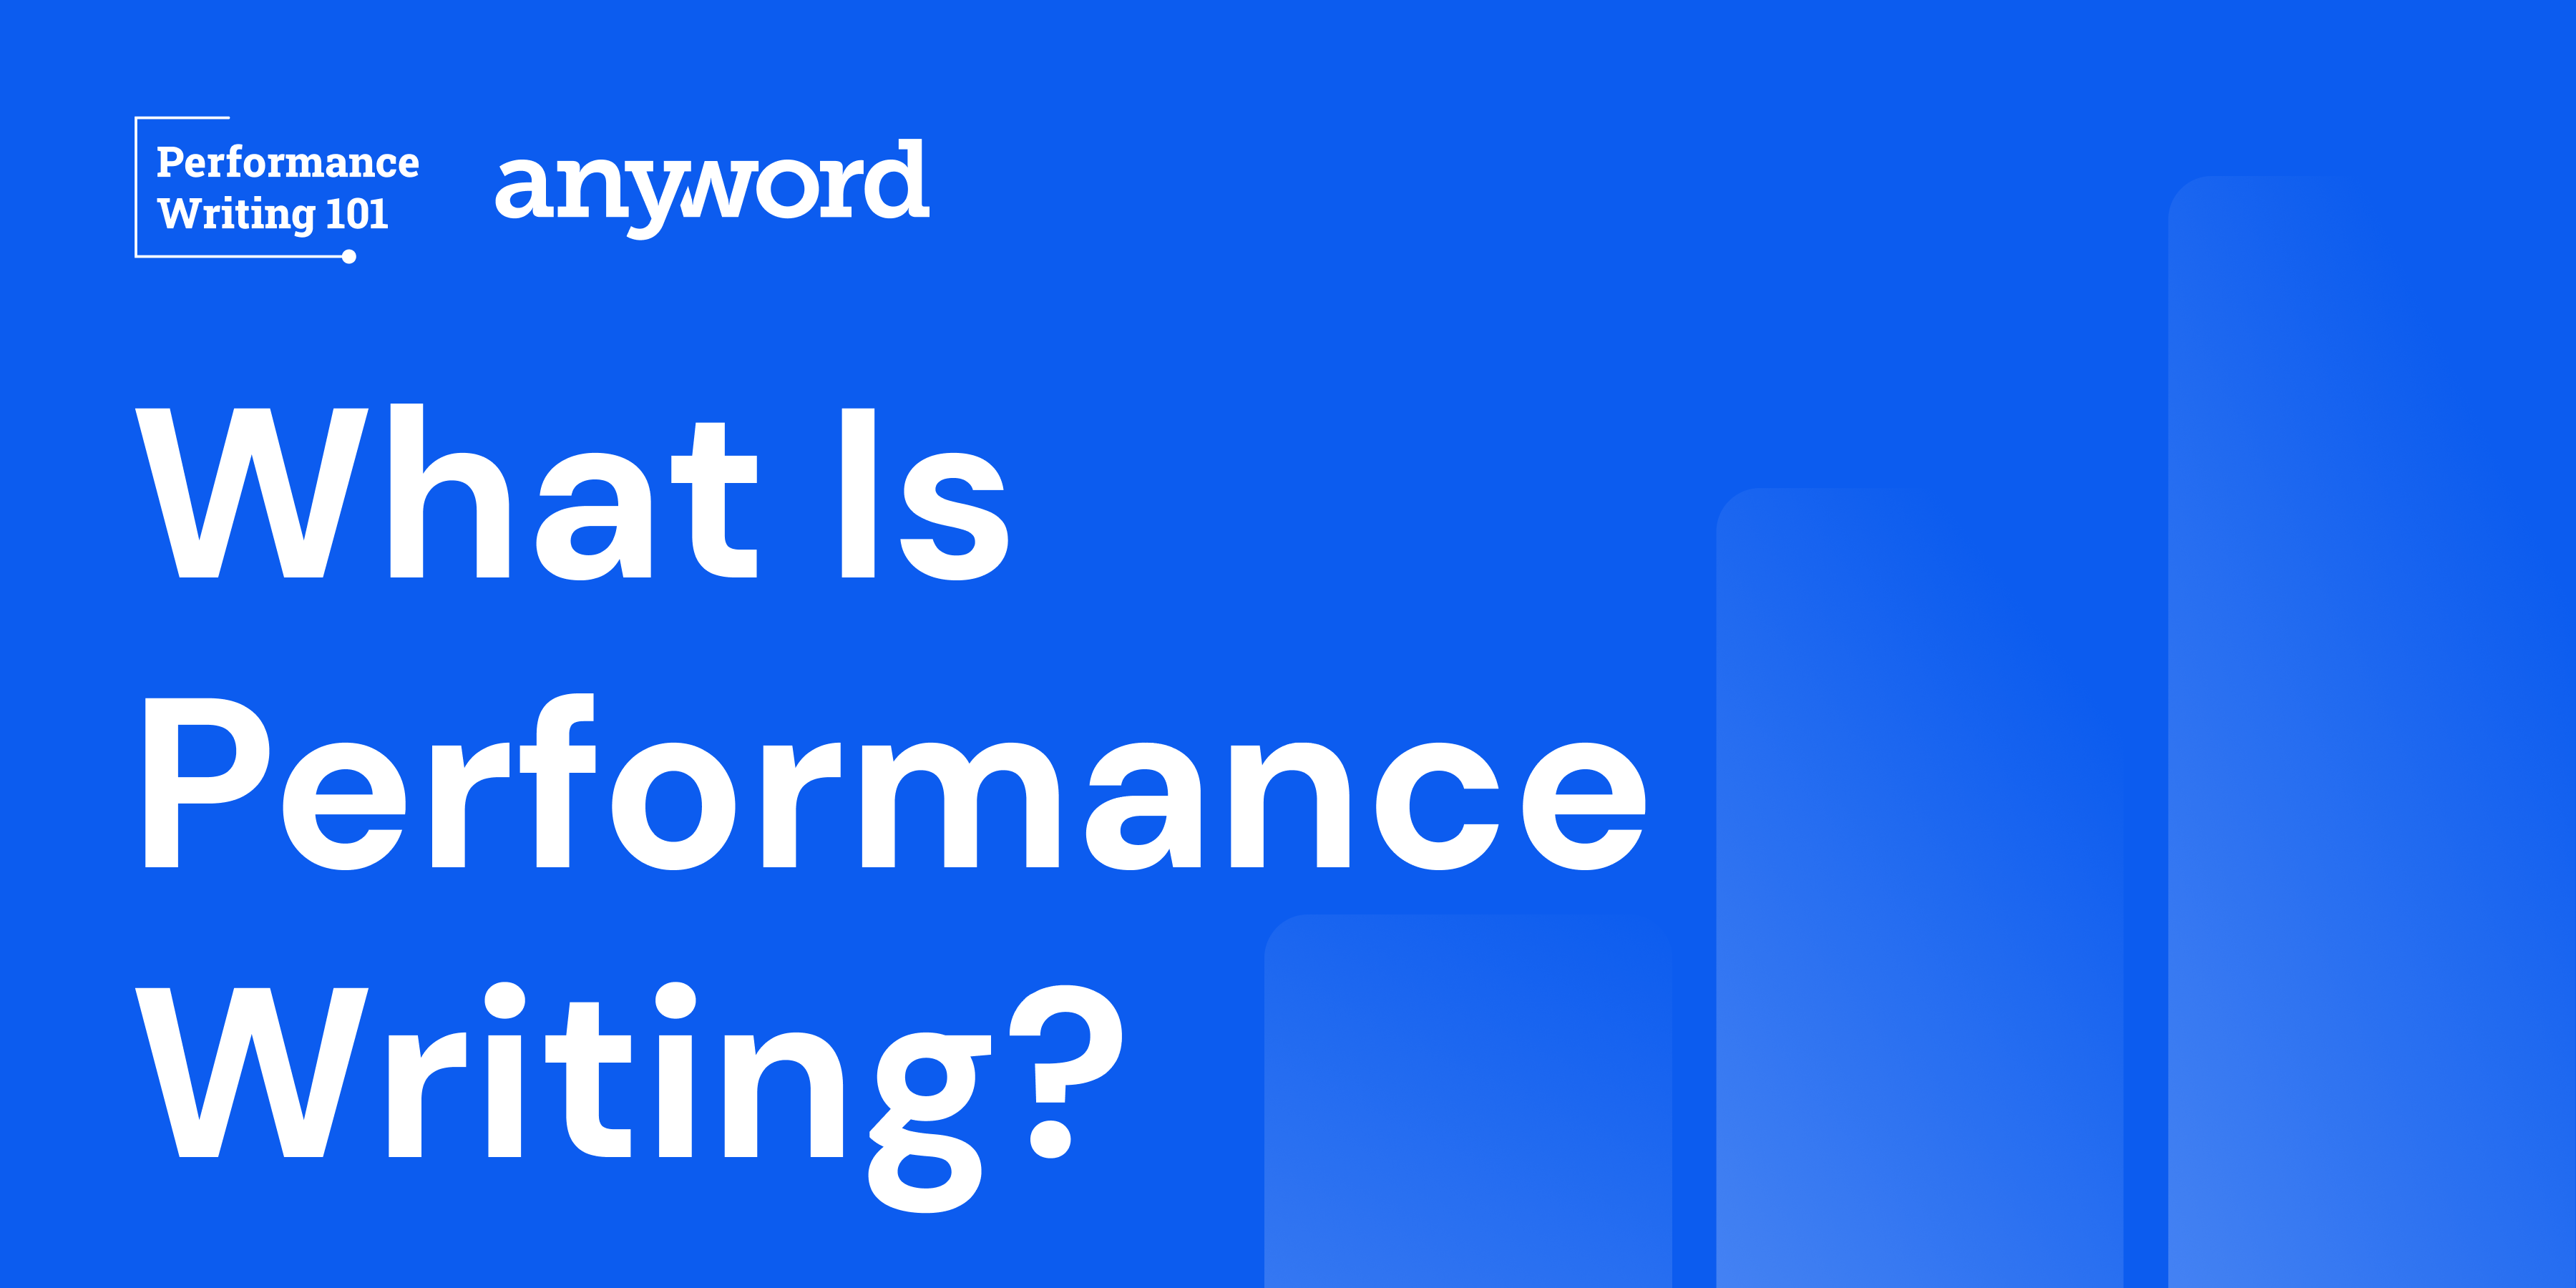 Performance Writing 101: What Is Performance Writing